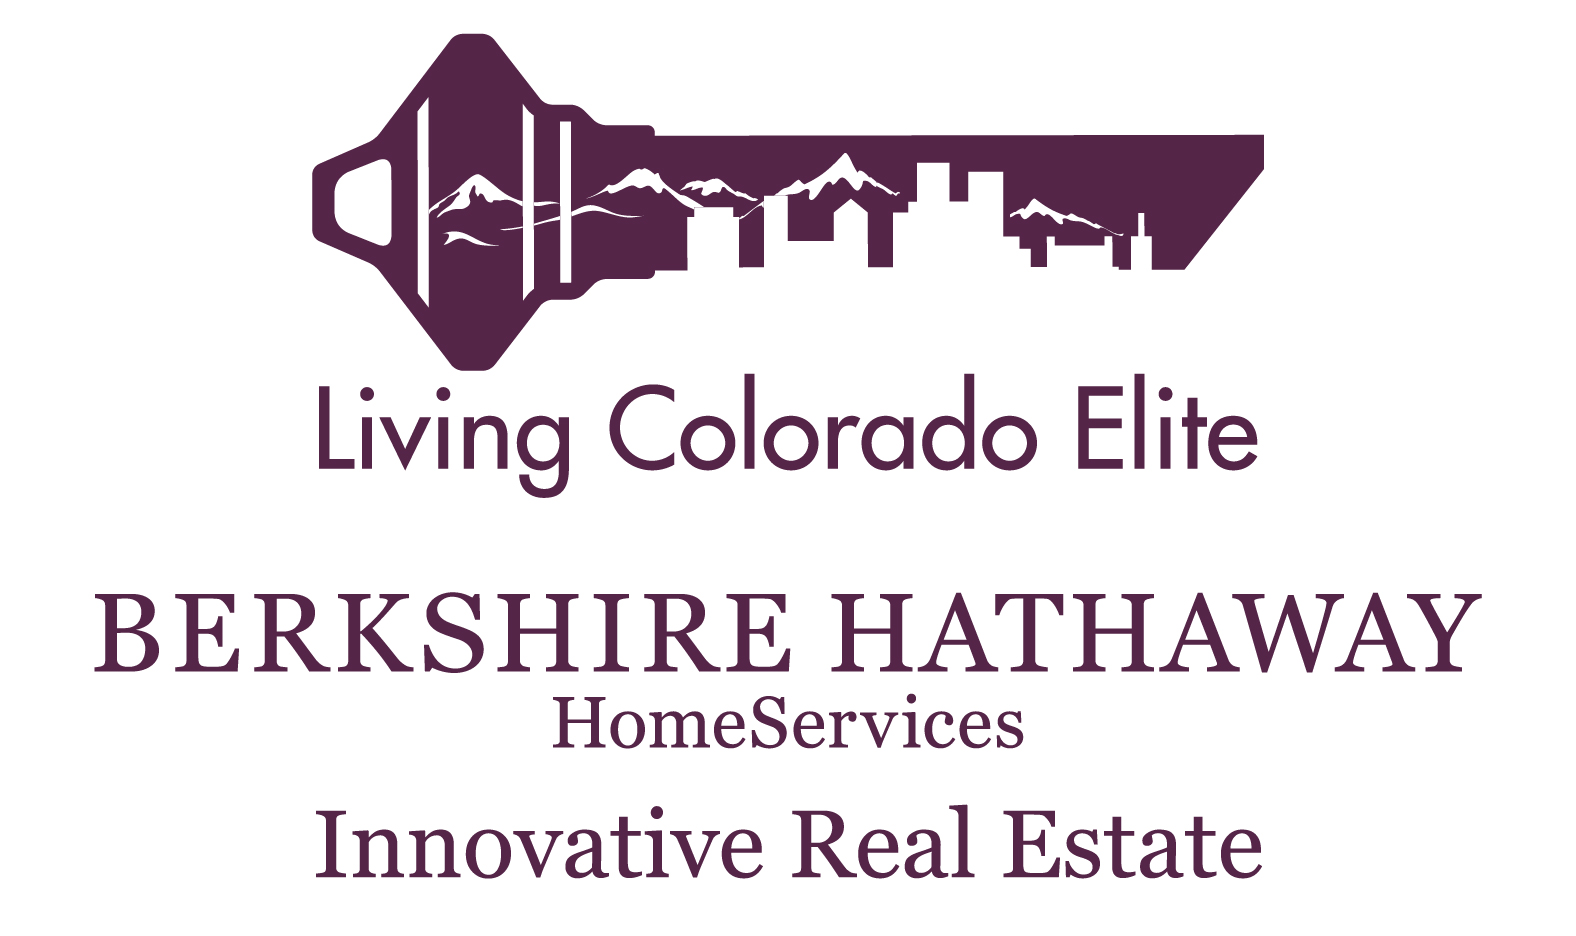 Berkshire Hathaway HomeServices Innovative Real Estate